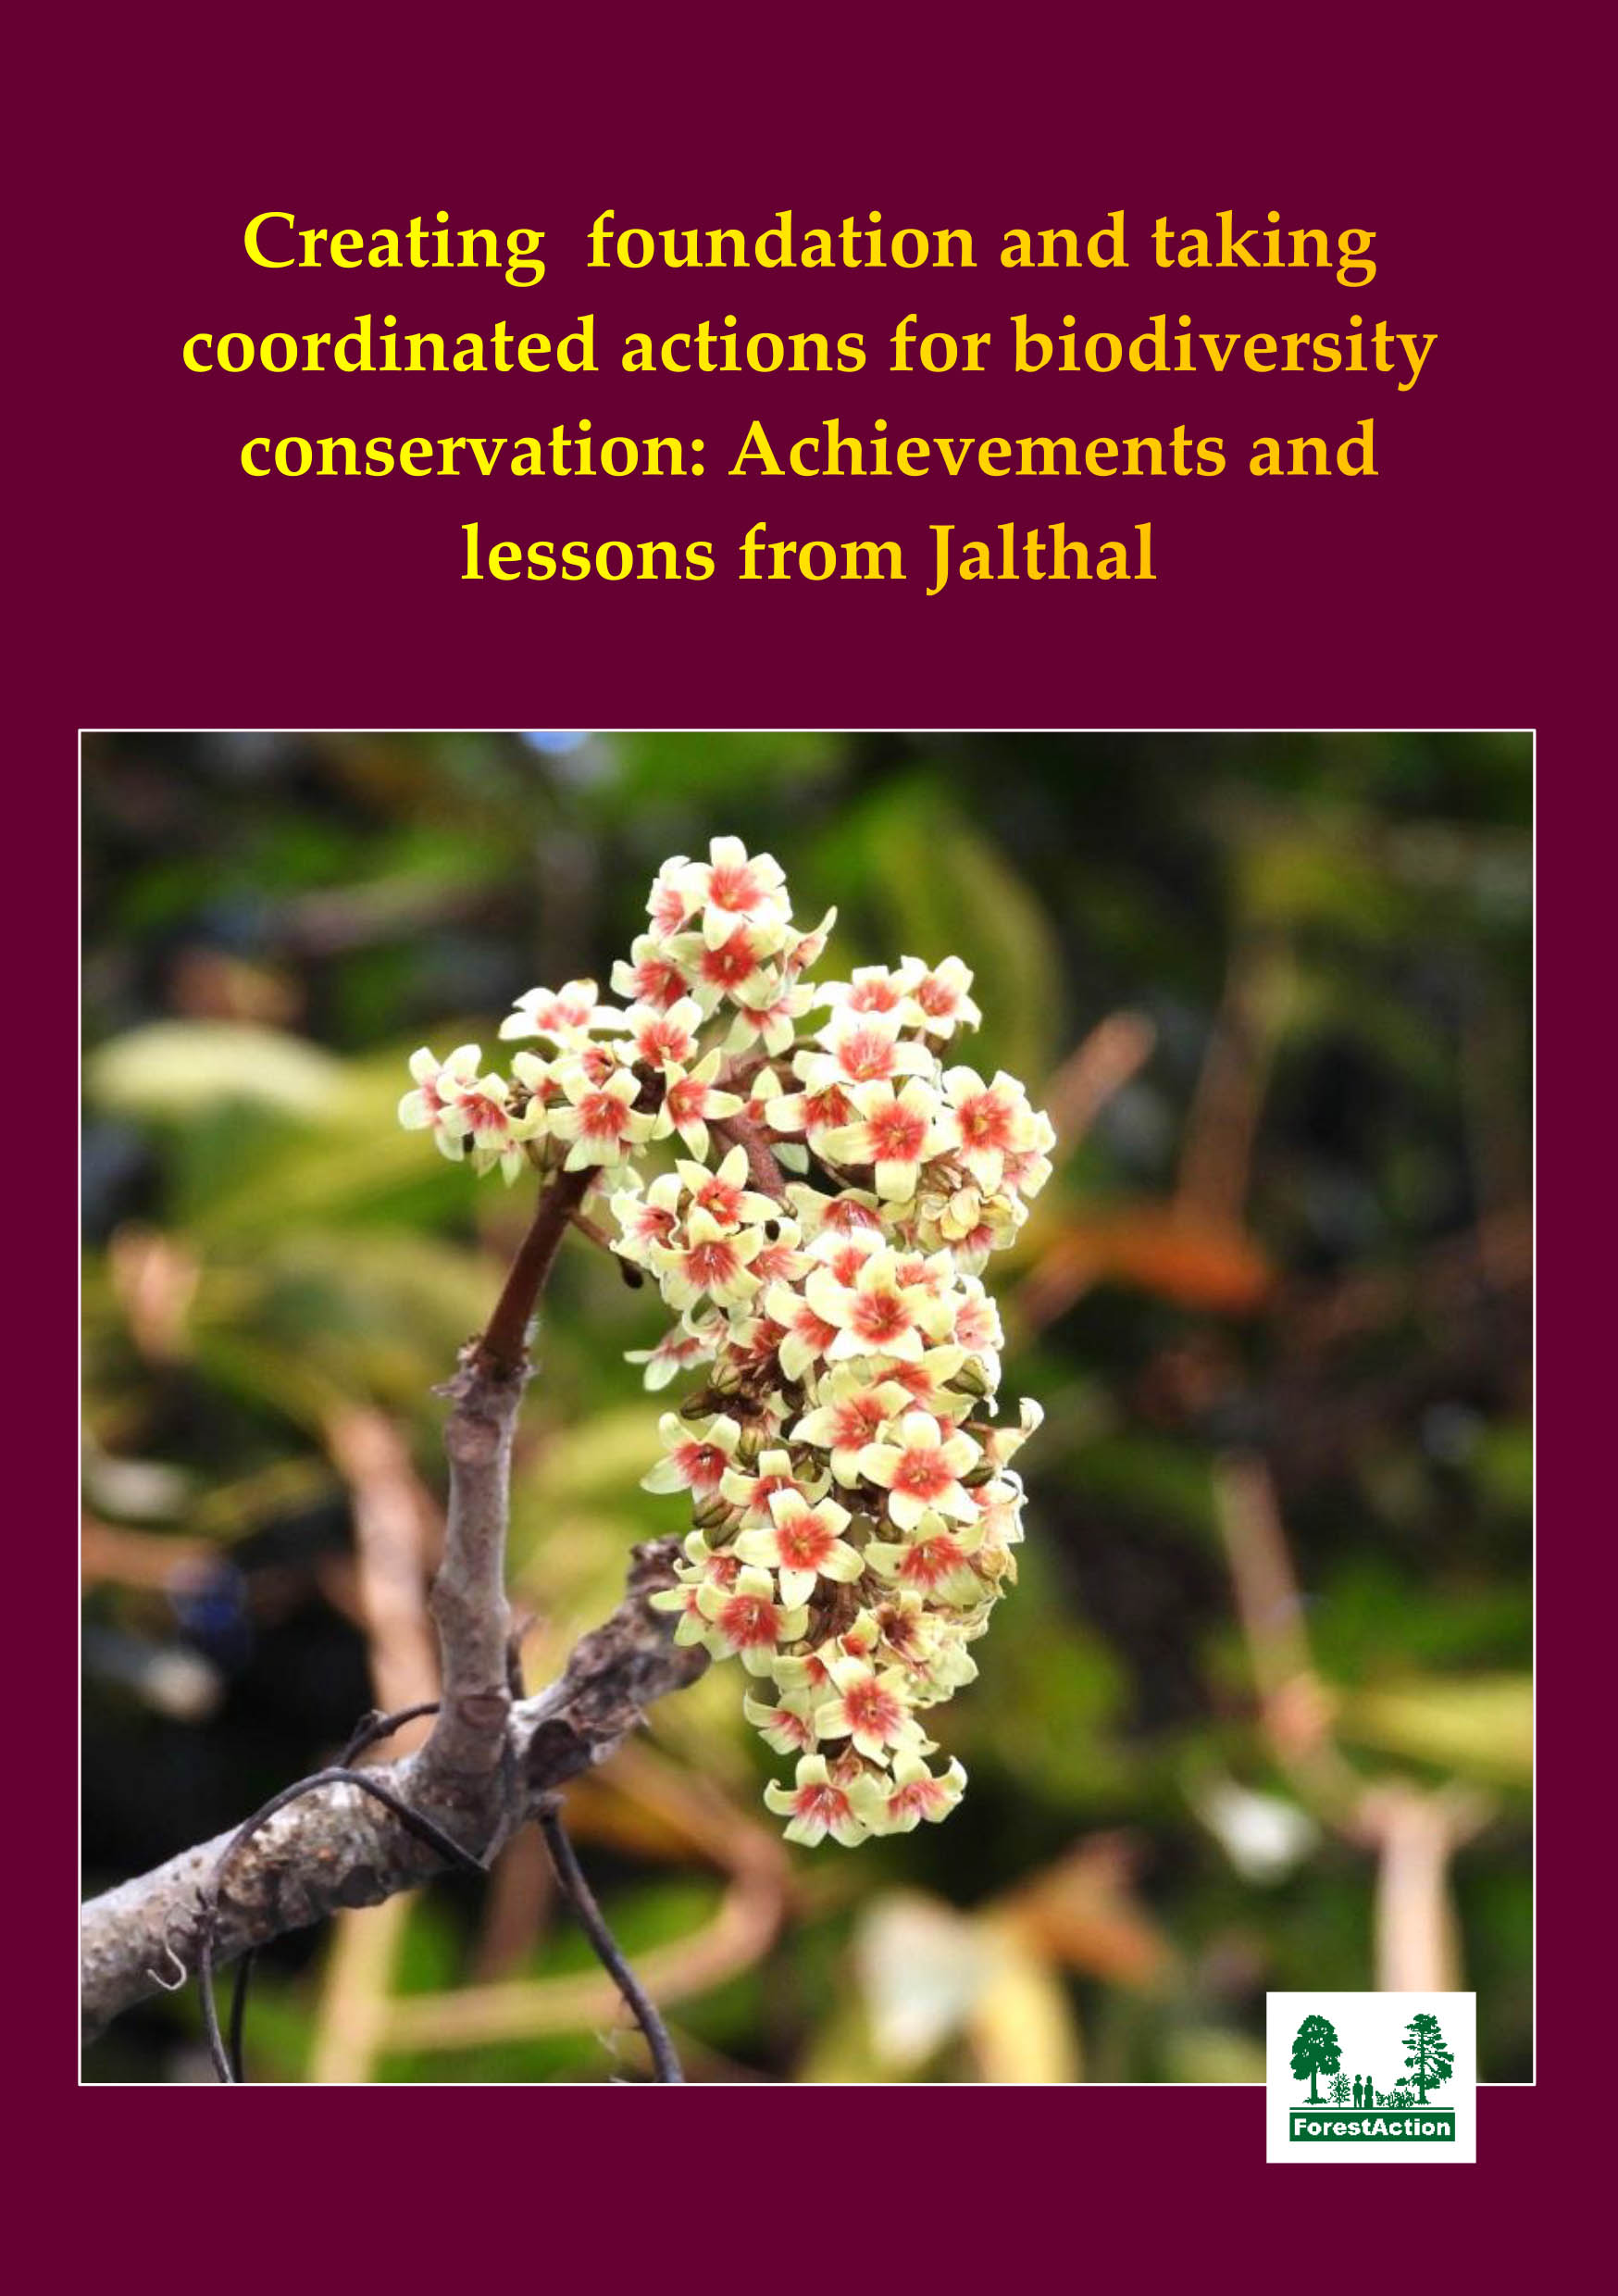 Creating foundation and taking coordinated actions for biodiversity conservation: Achievements and lessons from Jalthal